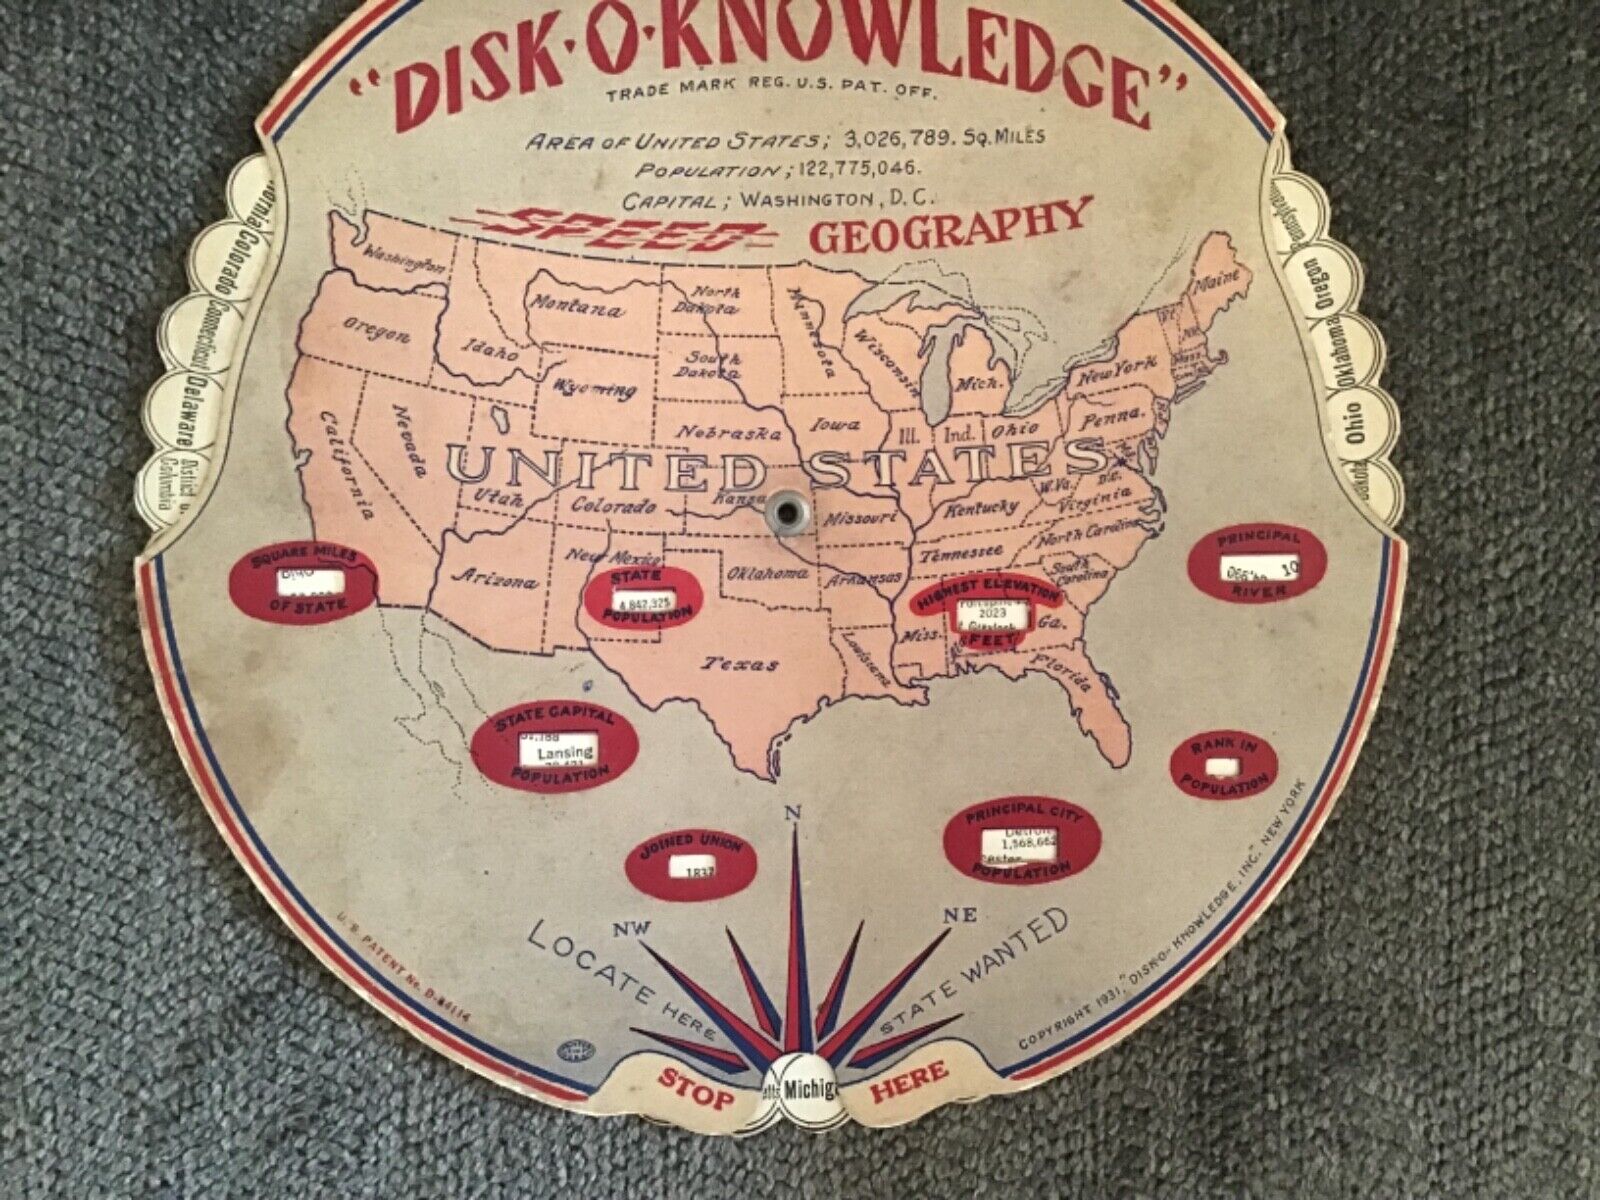 Antique 1931 DISK~O~KNOWLEDGE Speed Geography Spin Wheel Learn The States Lesson